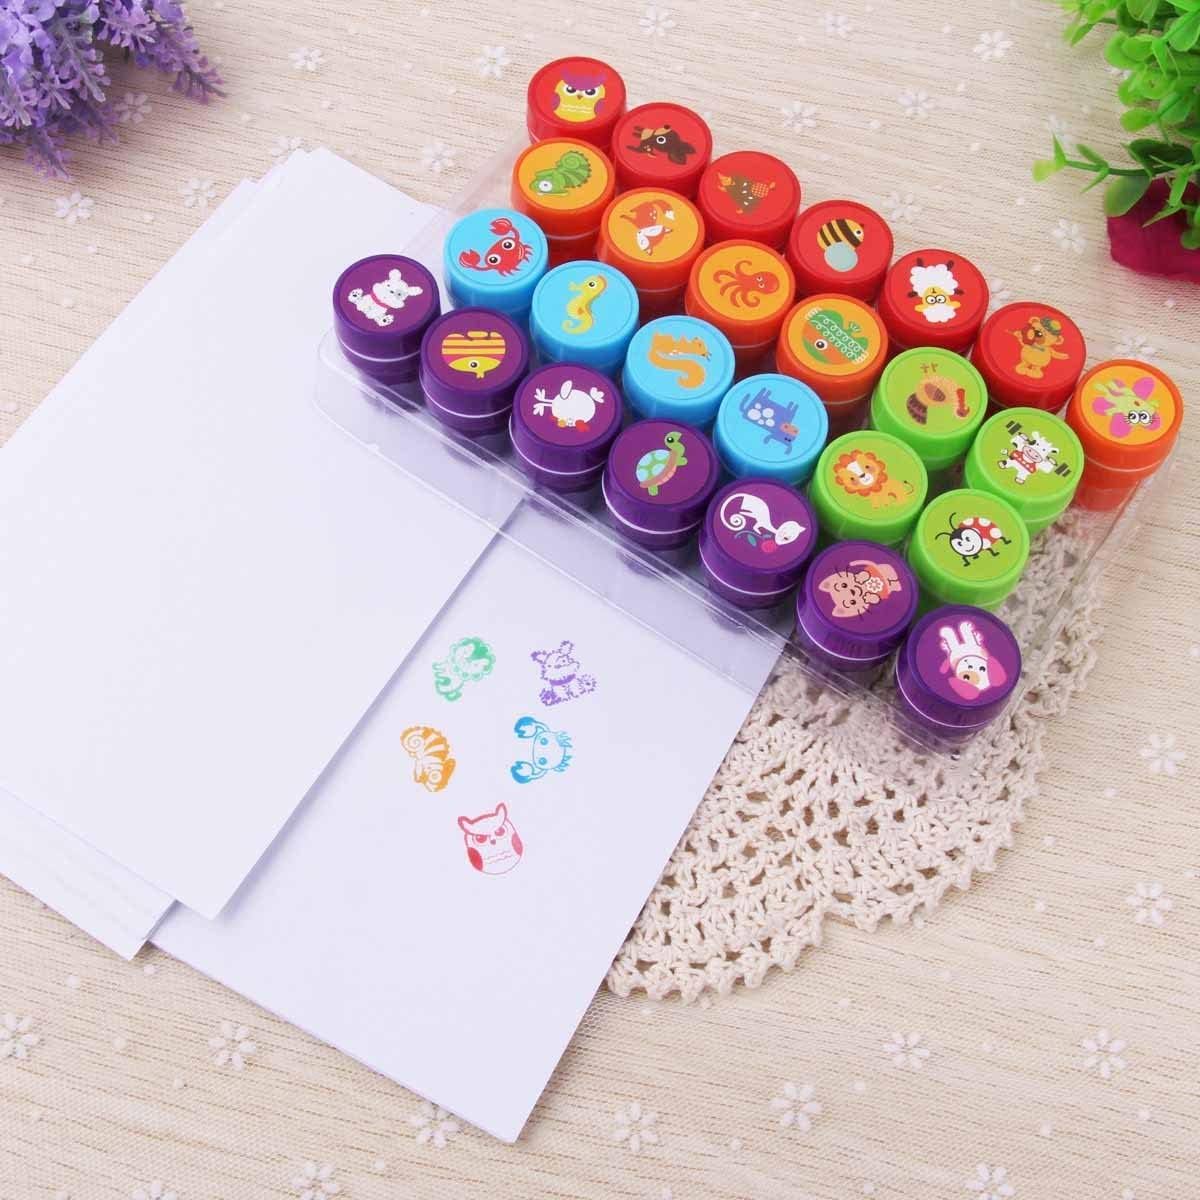 CHANEDE Alphabet Stamps for Kids,26 Pieces Self-Ink Washable Stampers Toys for Children Crafts Party Favor,School Prizes,Birthday Gift,Learn Props (26 Pieces Animals Stampes New)